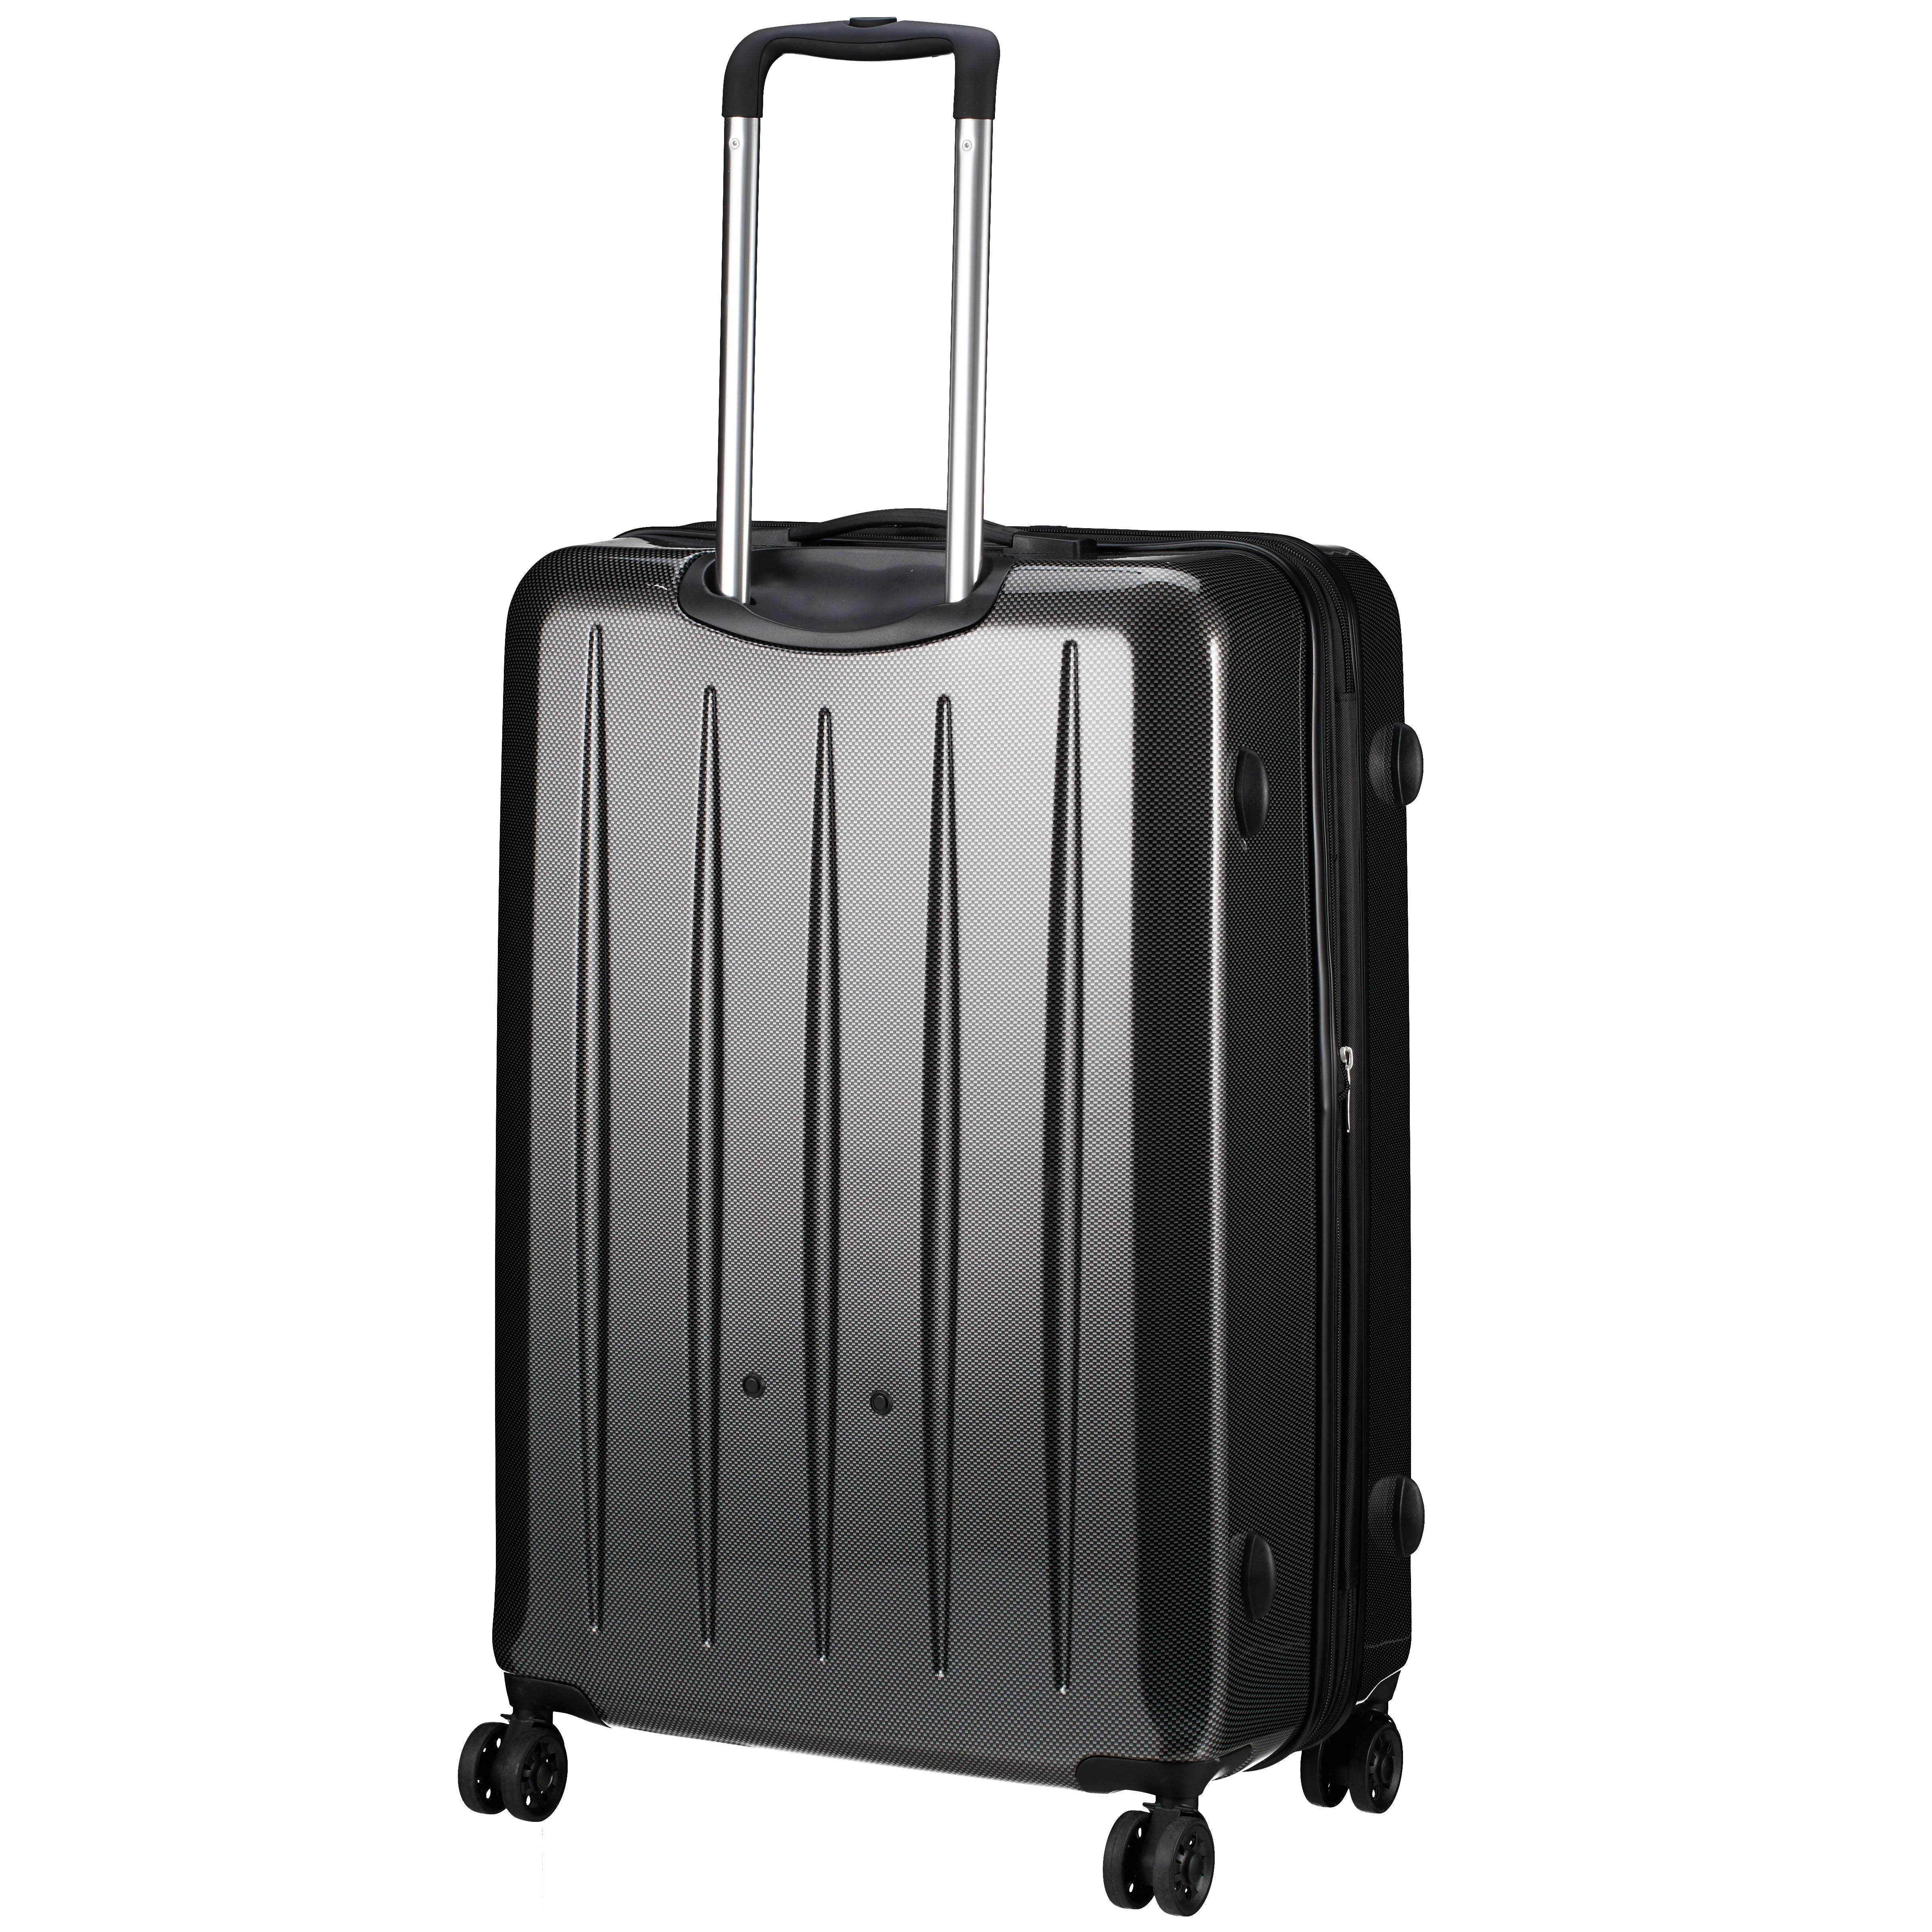 Check In London 2.0 trolley 4 roues 75 cm - Violet